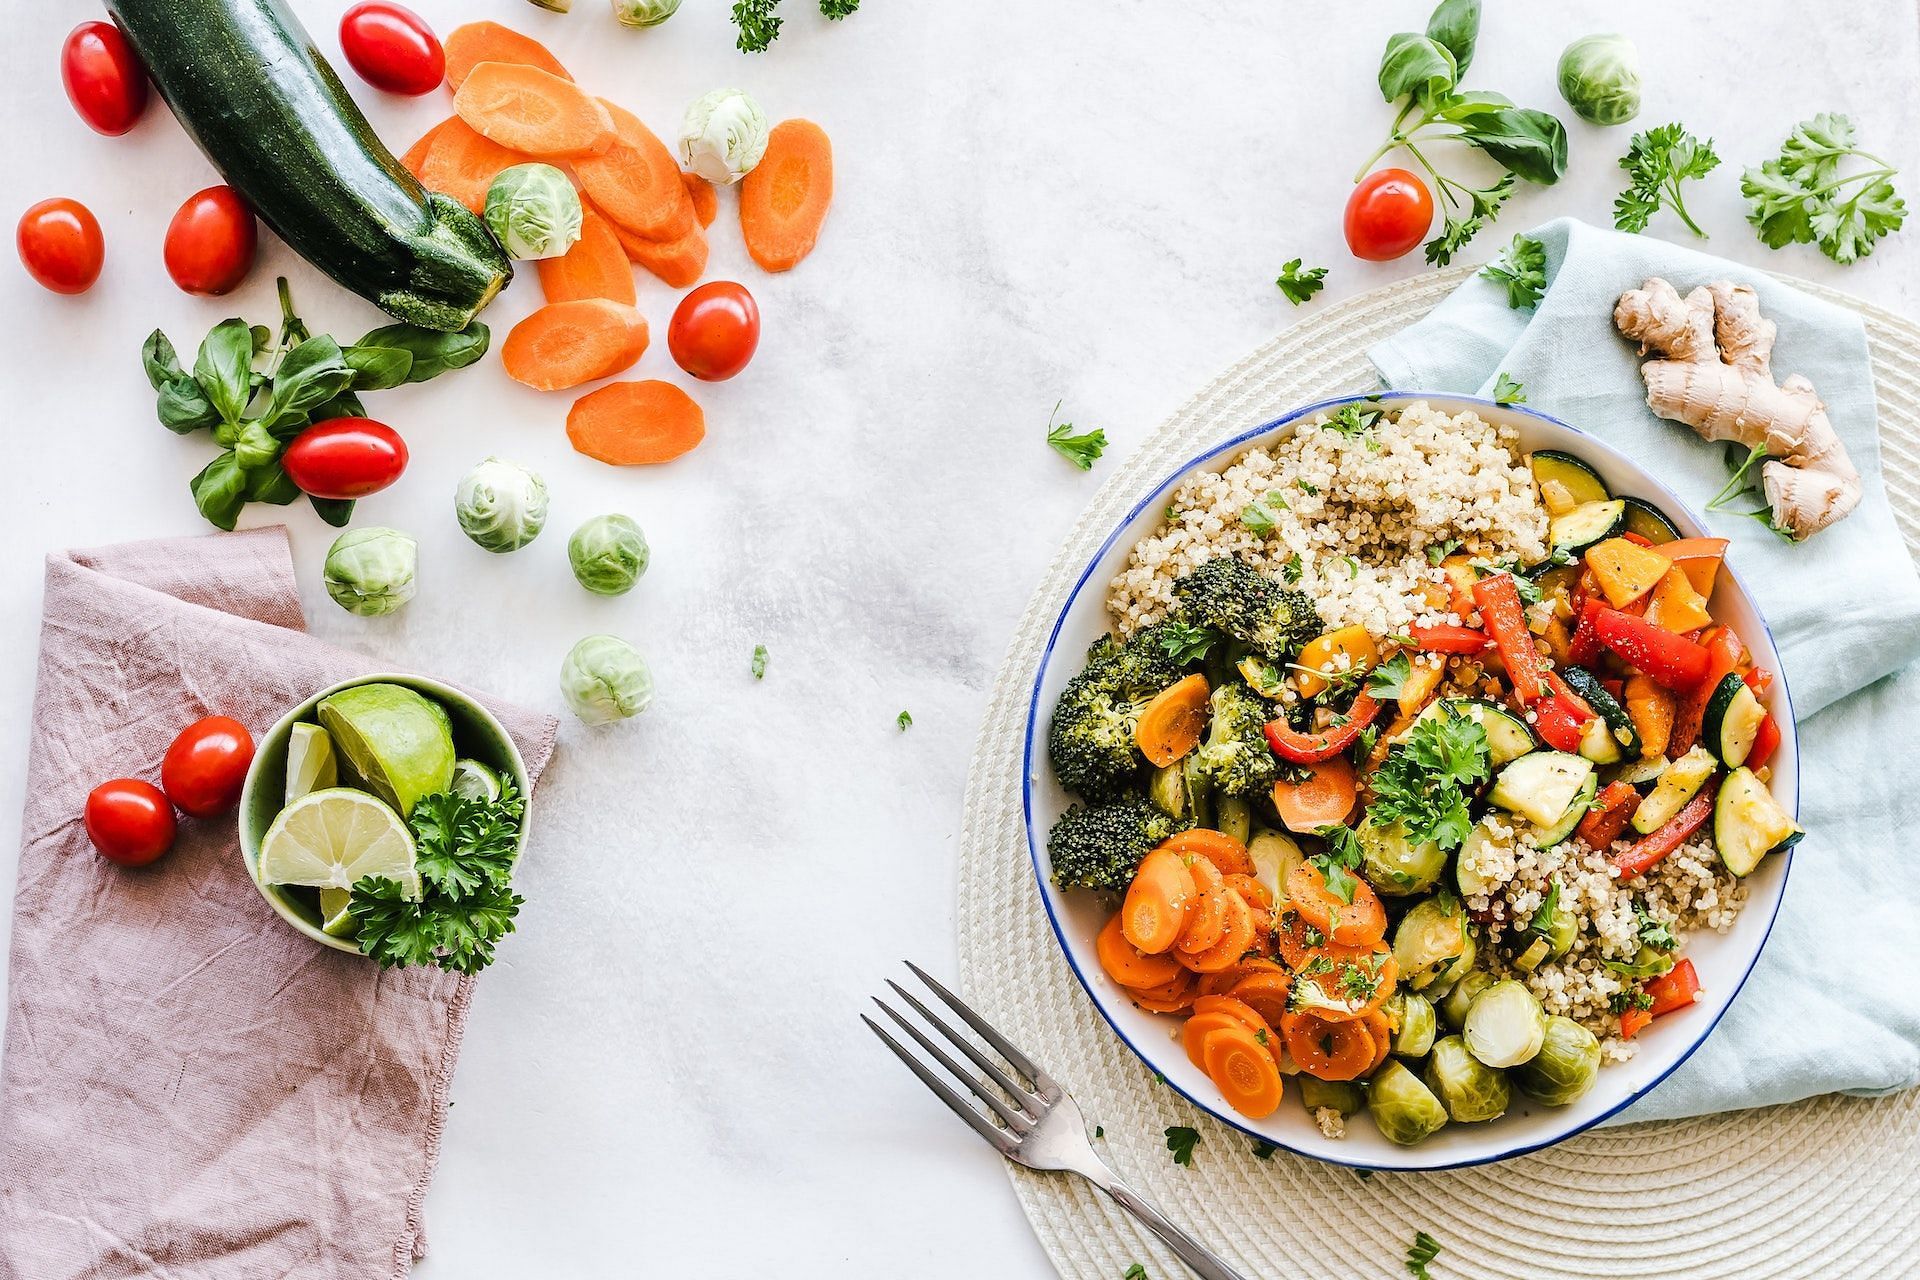 Magnesium-rich foods include fatty fish, green vegetables, whole grains and more. (Image via Pexels/Ella Olsson)